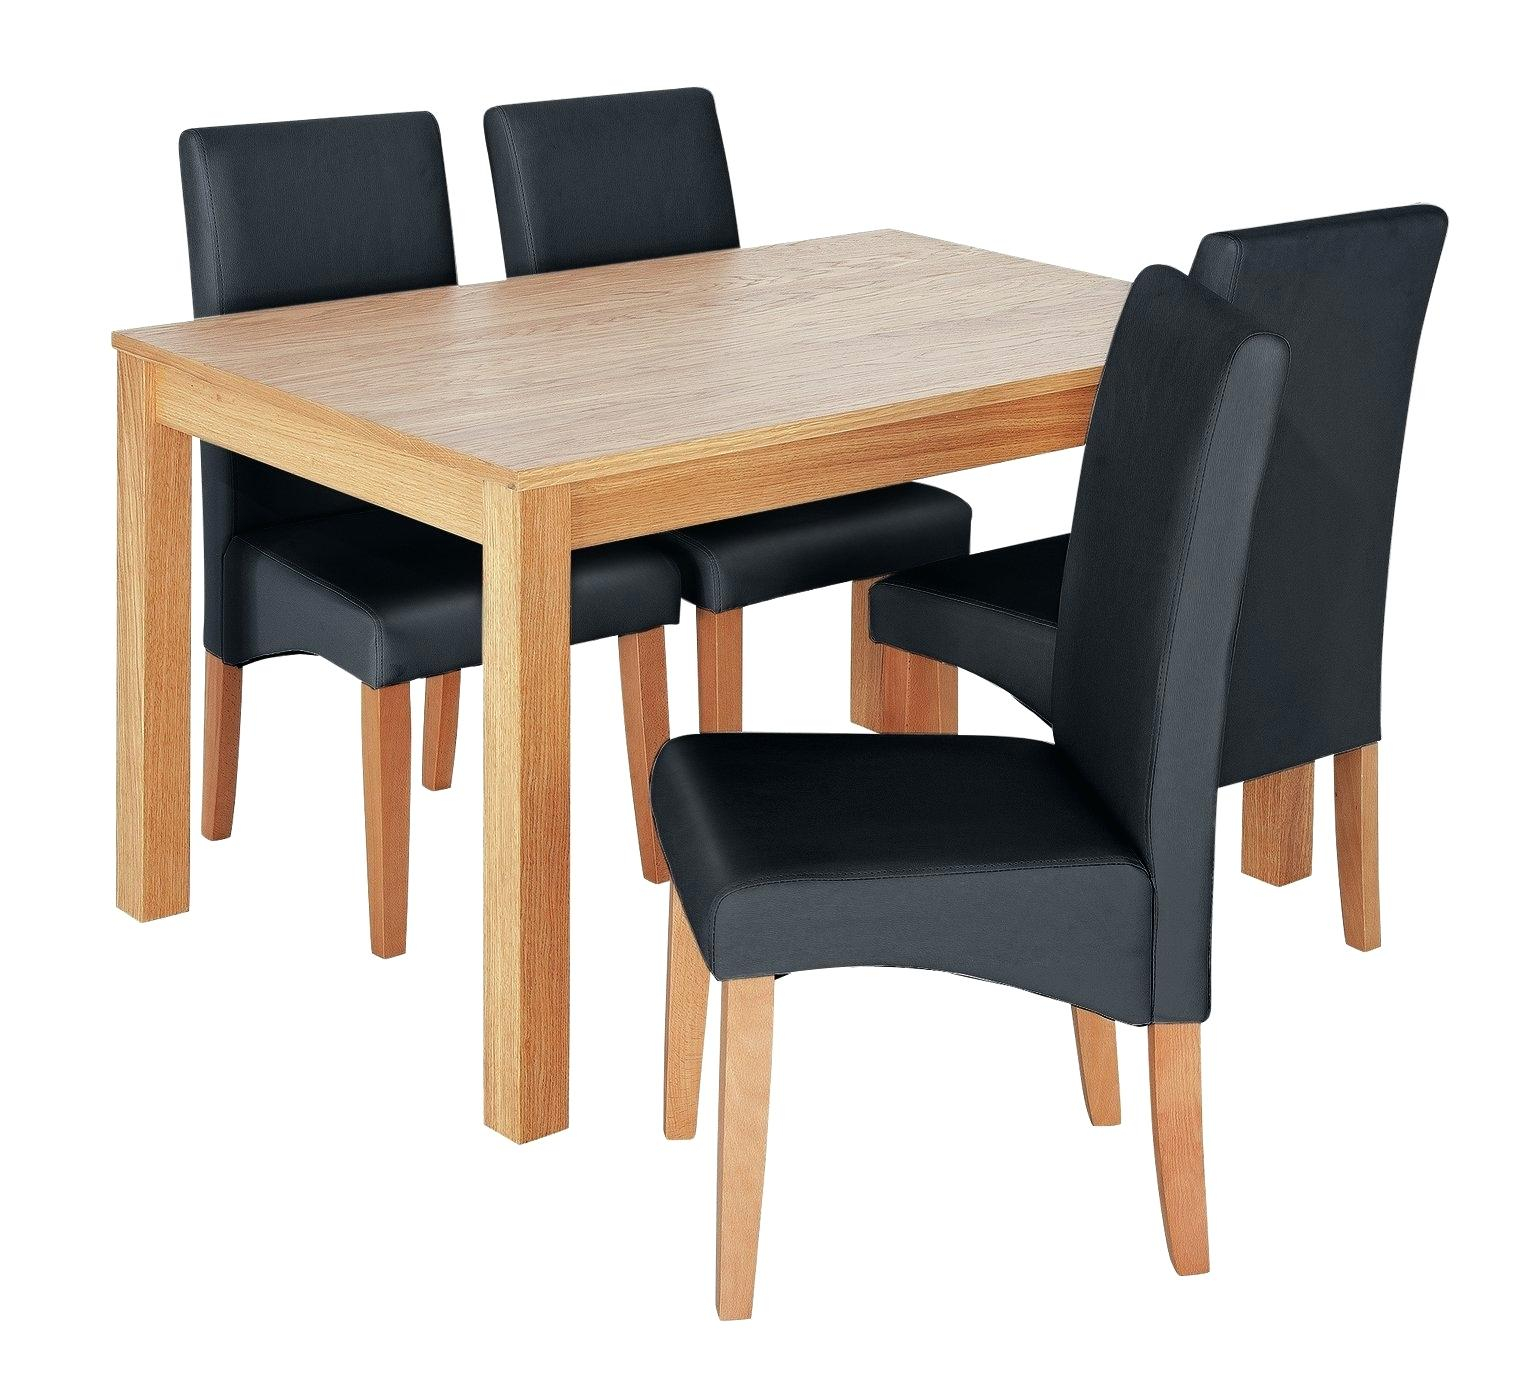 Oak Dining Room Table Oak Dining Room Set With 6 Chairs Oak with sizing 1515 X 1382